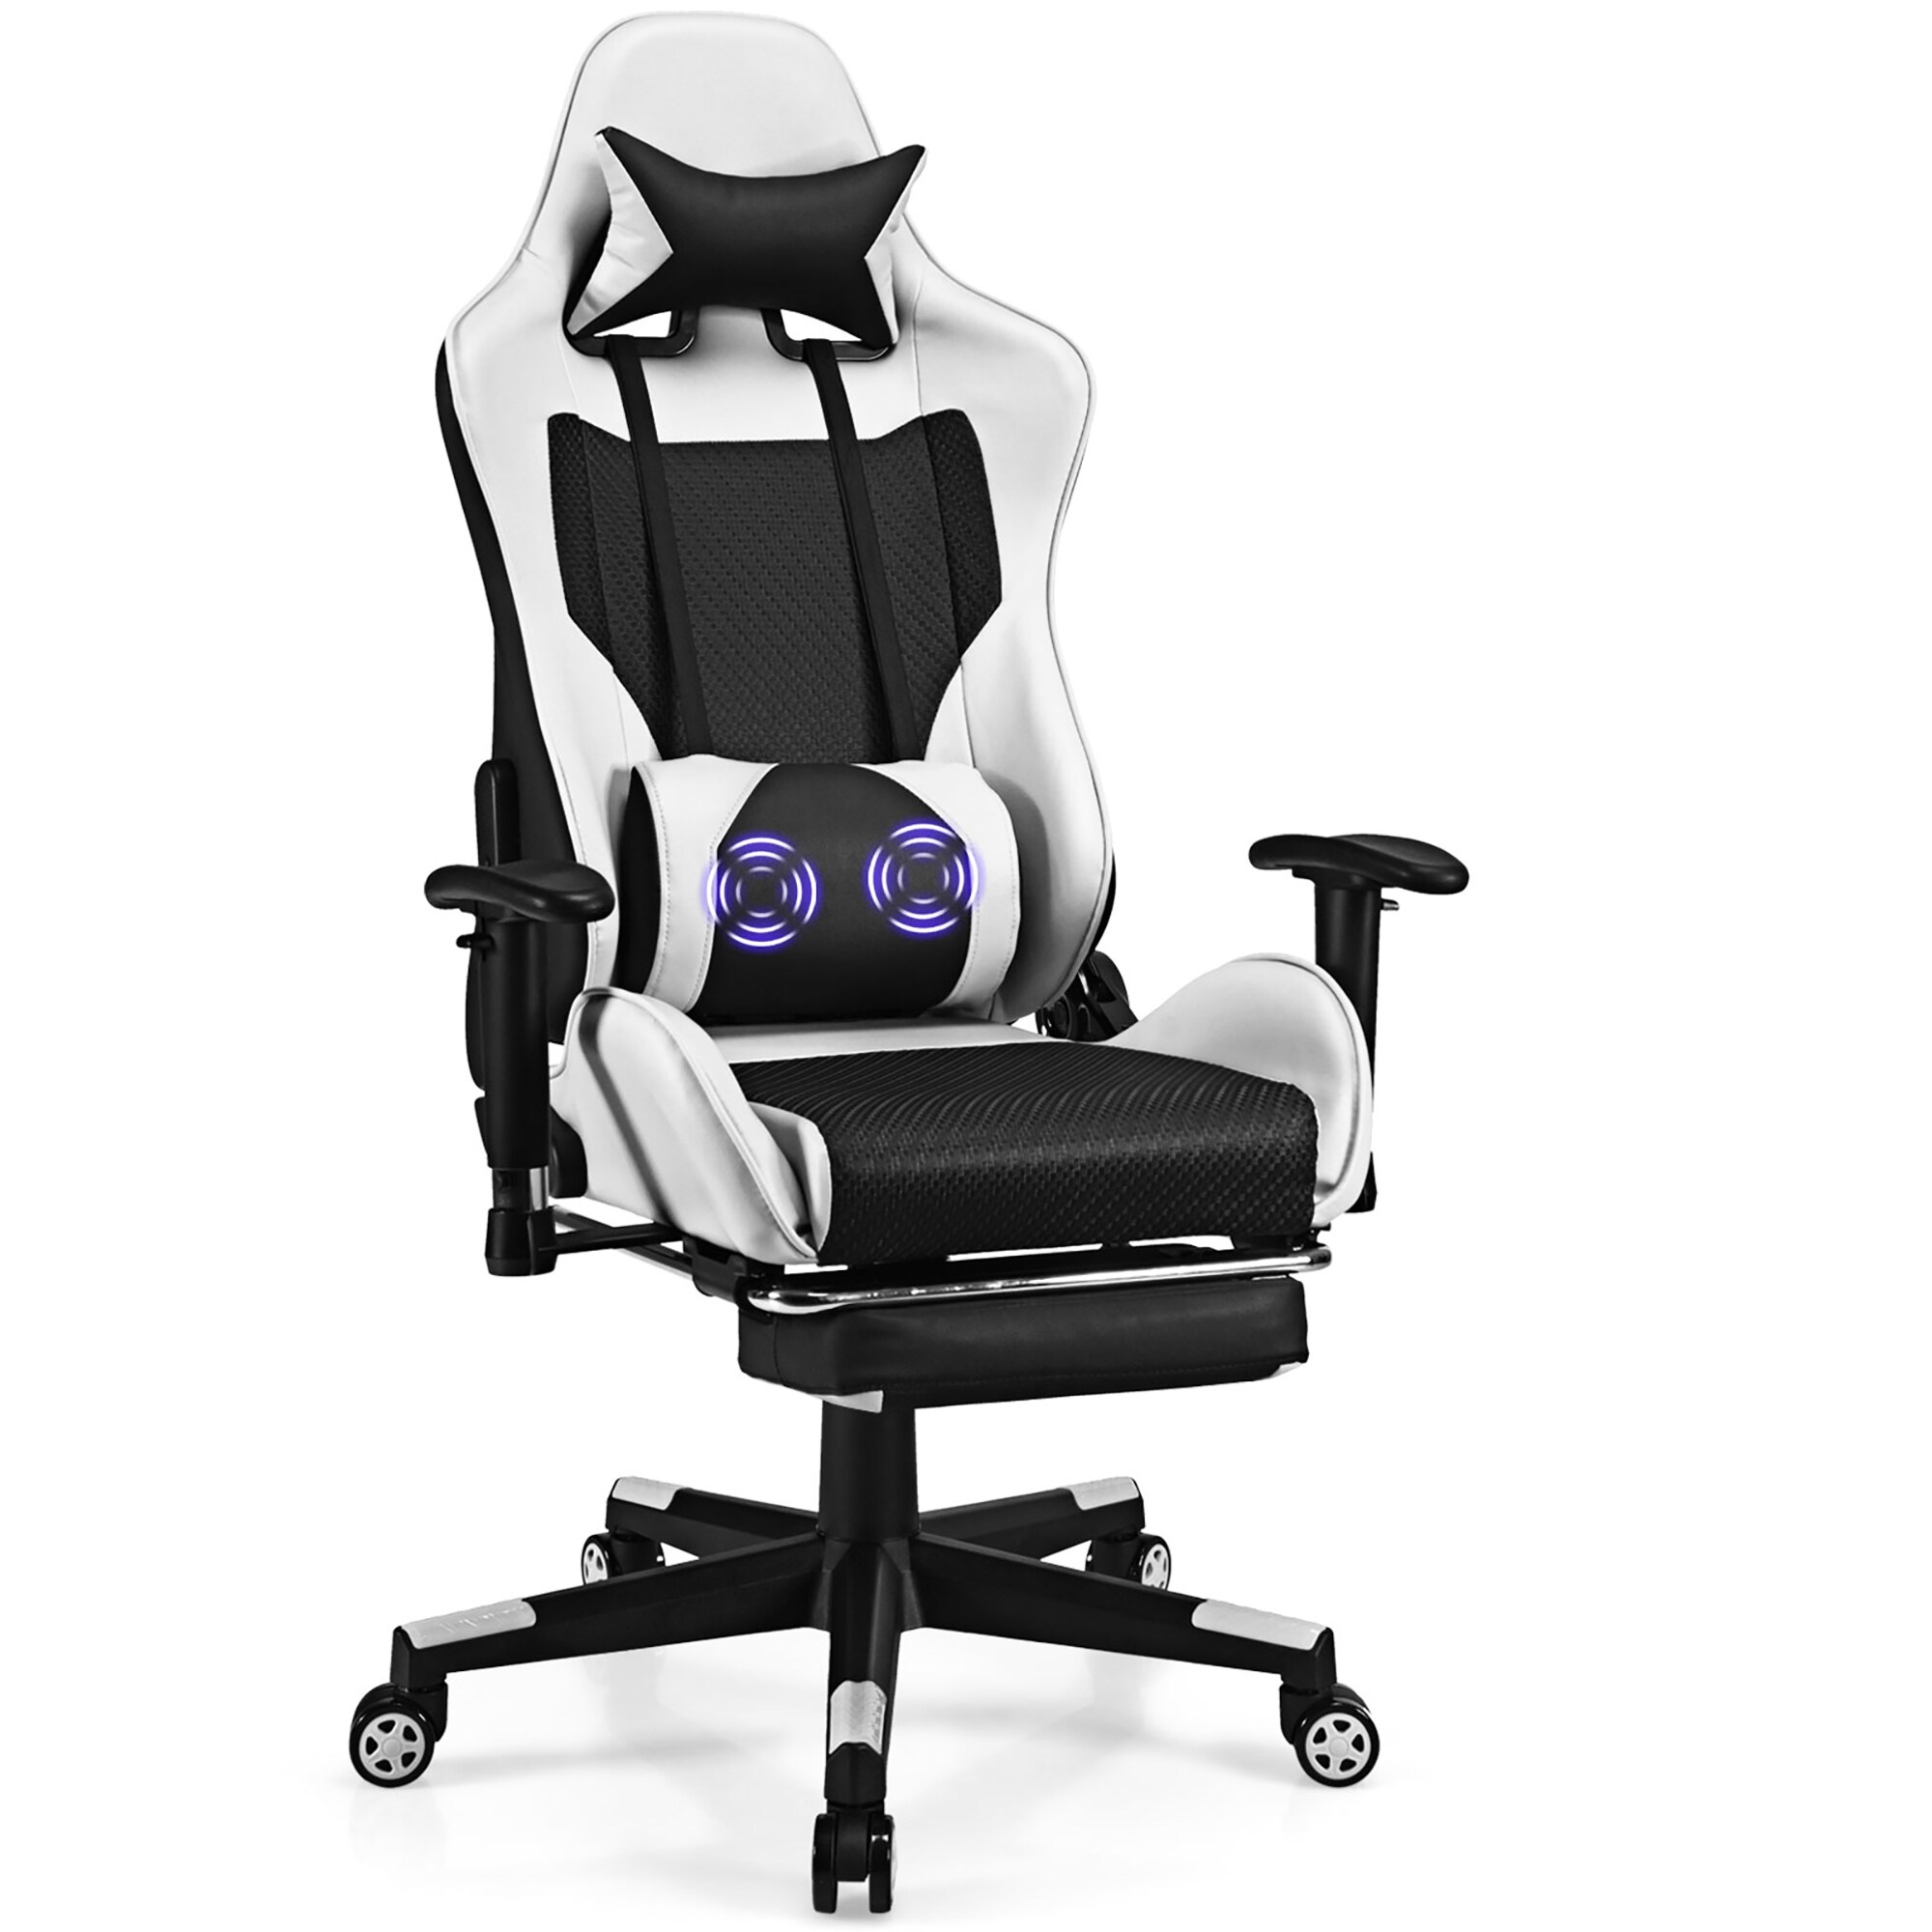 https://ak1.ostkcdn.com/images/products/is/images/direct/414e202b32ebad3d50e49a4e5aef3ce662a8d4ec/Gaming-Chair-Massage-Office-Chair-Computer-Gaming-Racing-Chair.jpg